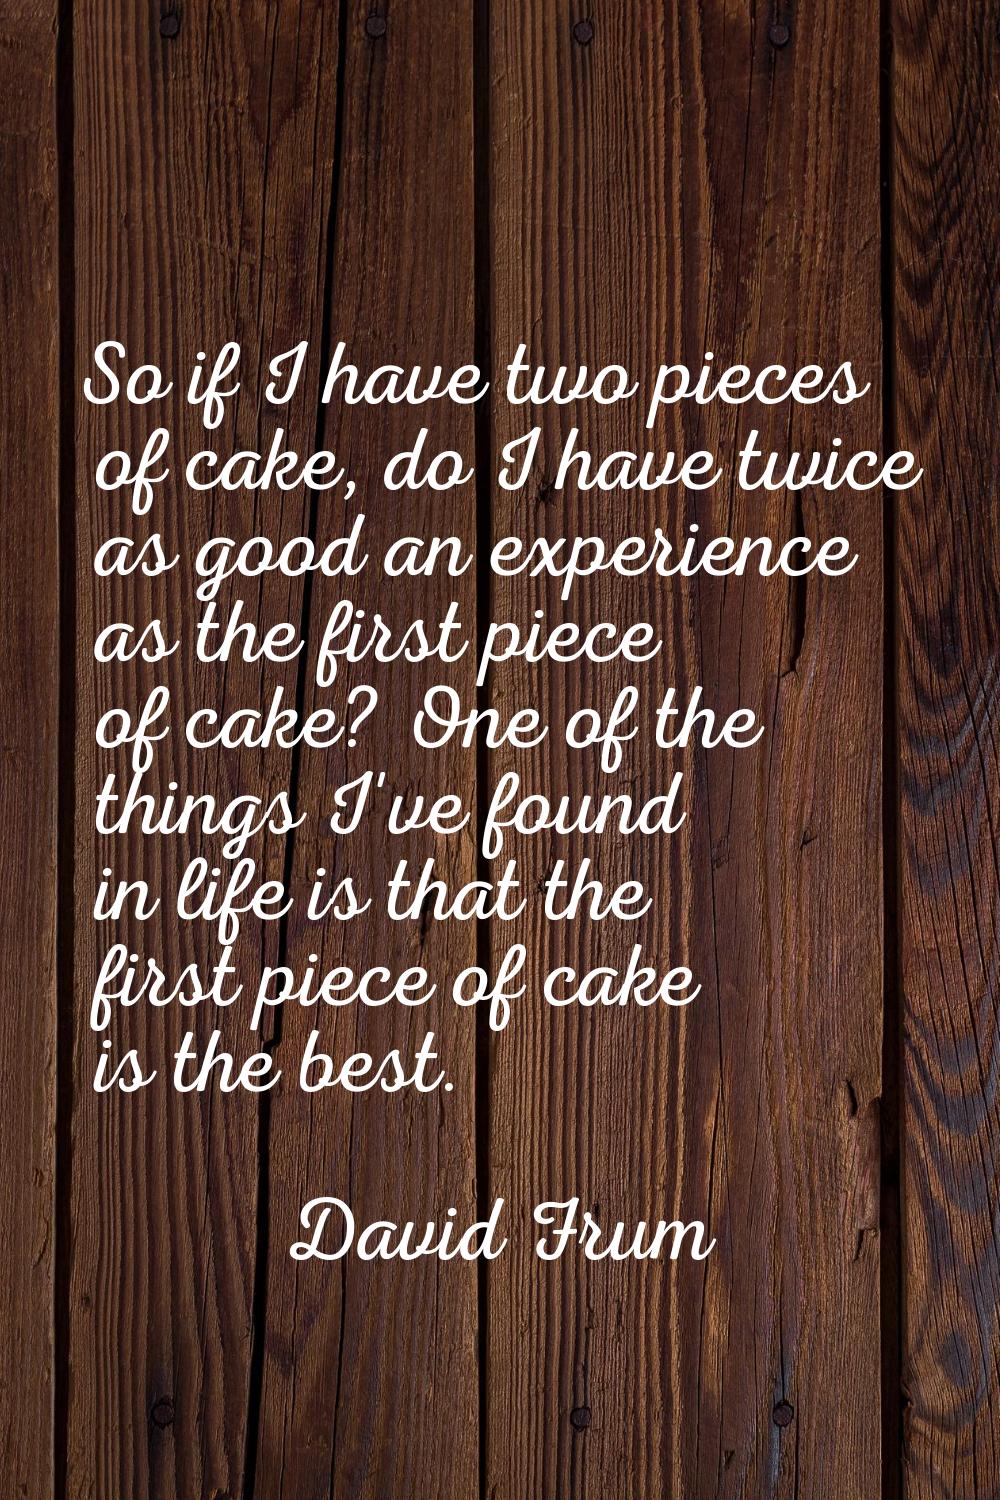 So if I have two pieces of cake, do I have twice as good an experience as the first piece of cake? 